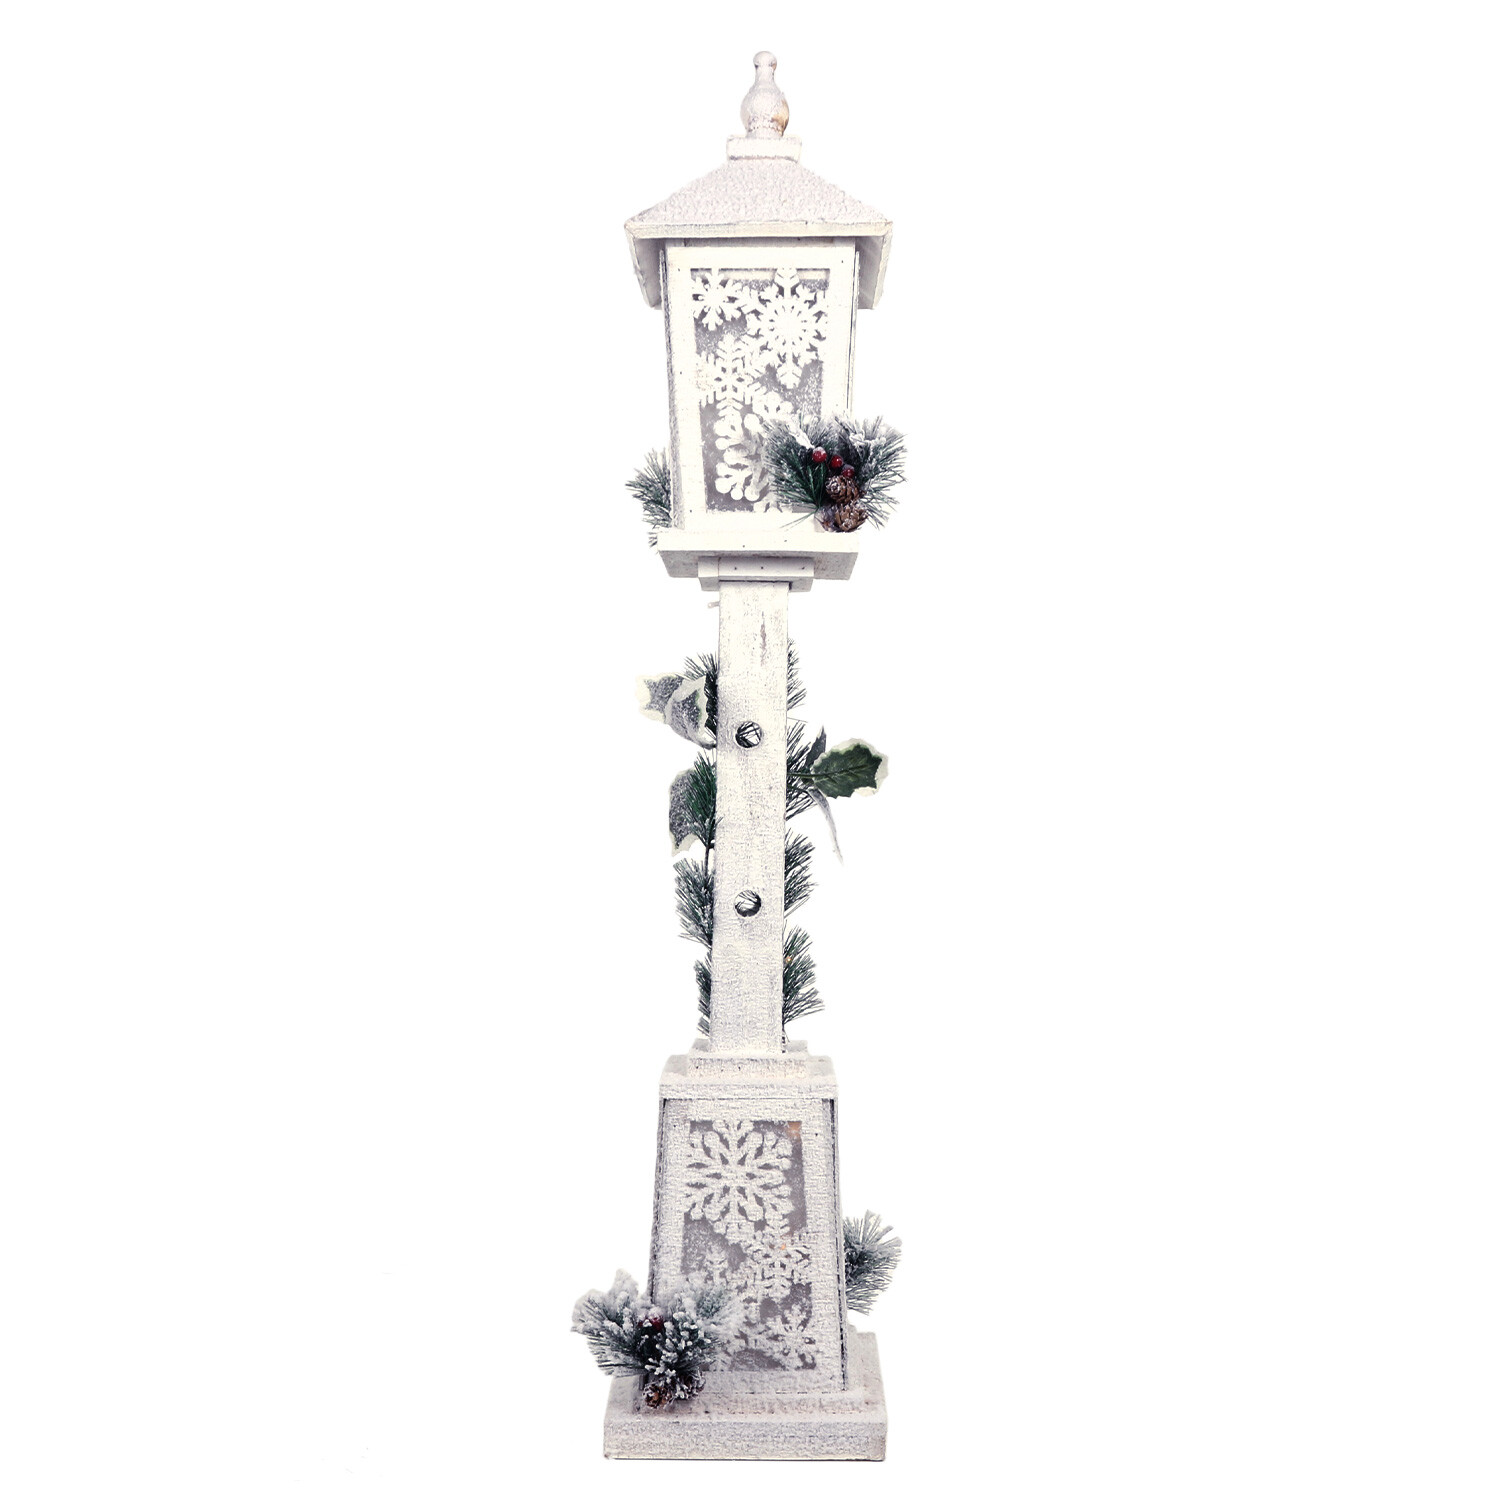 Frosted Fairytale White Snowy Wood Lantern Decoration Ornament Image 1